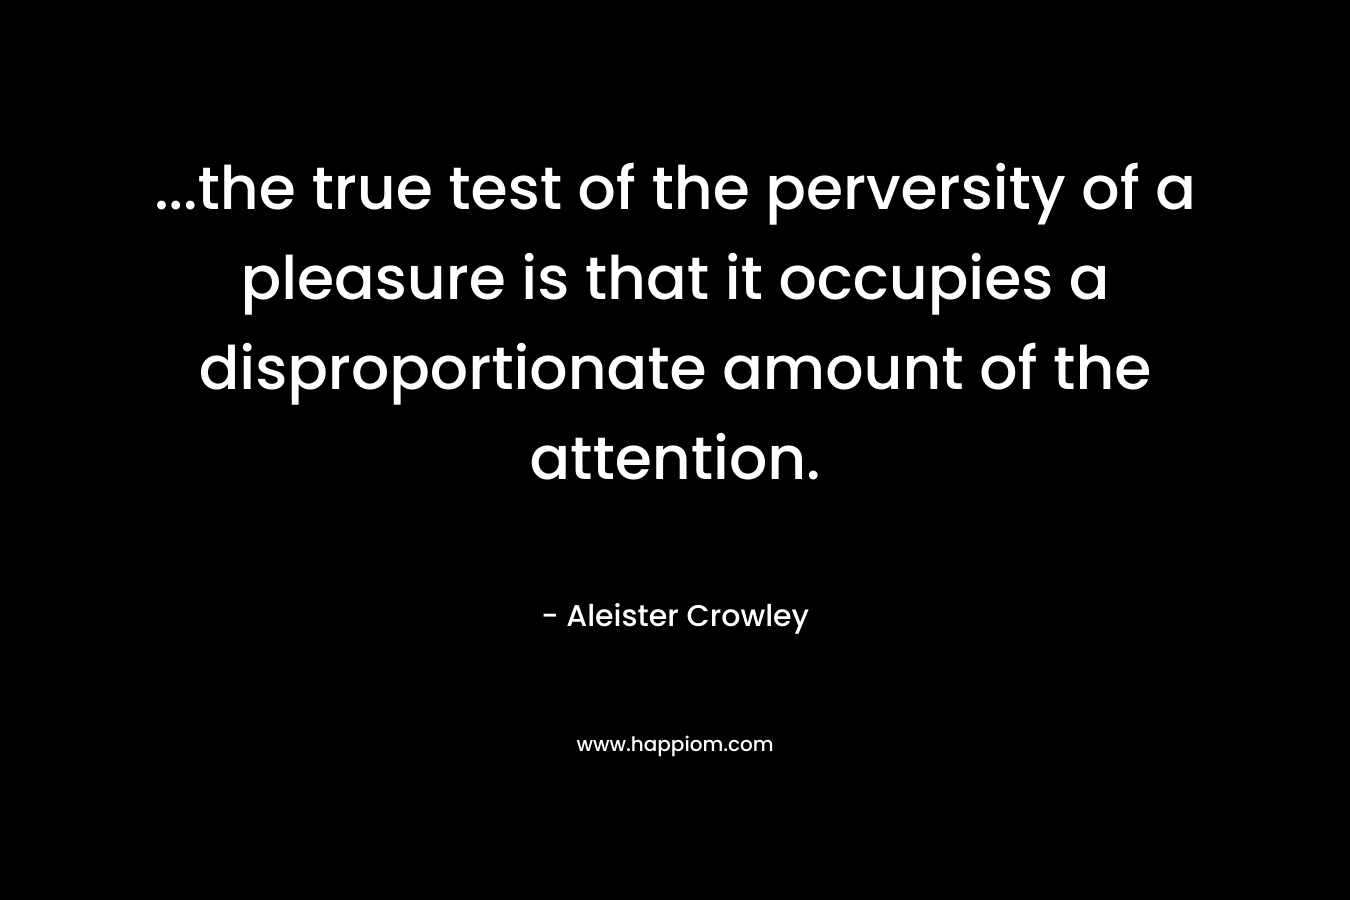 …the true test of the perversity of a pleasure is that it occupies a disproportionate amount of the attention. – Aleister Crowley